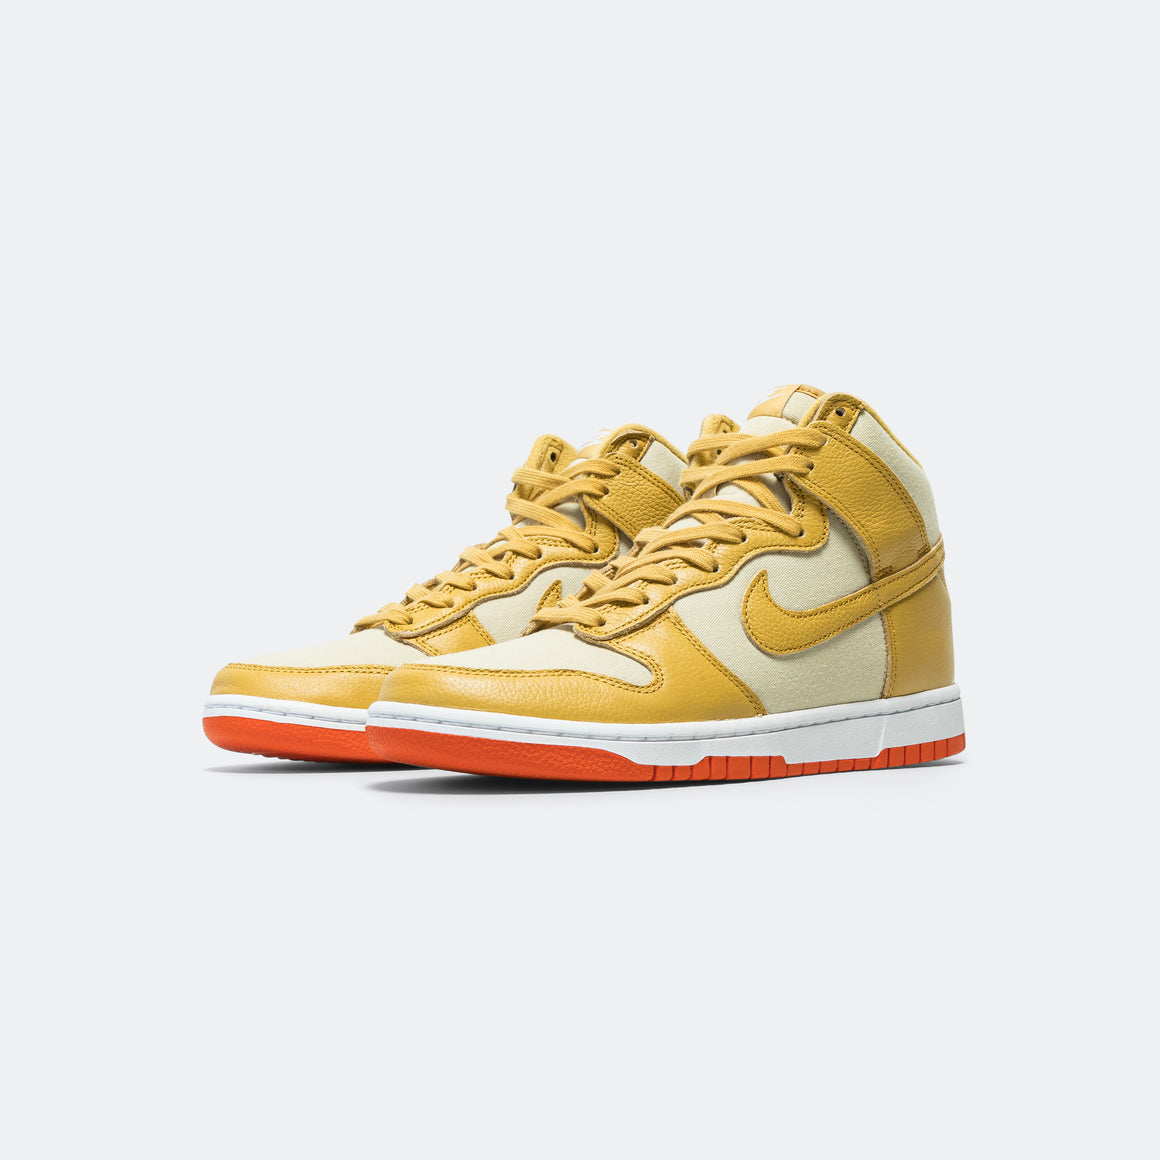 Nike - Dunk High Retro - Team Gold/Wheat Gold-Team Gold - UP THERE